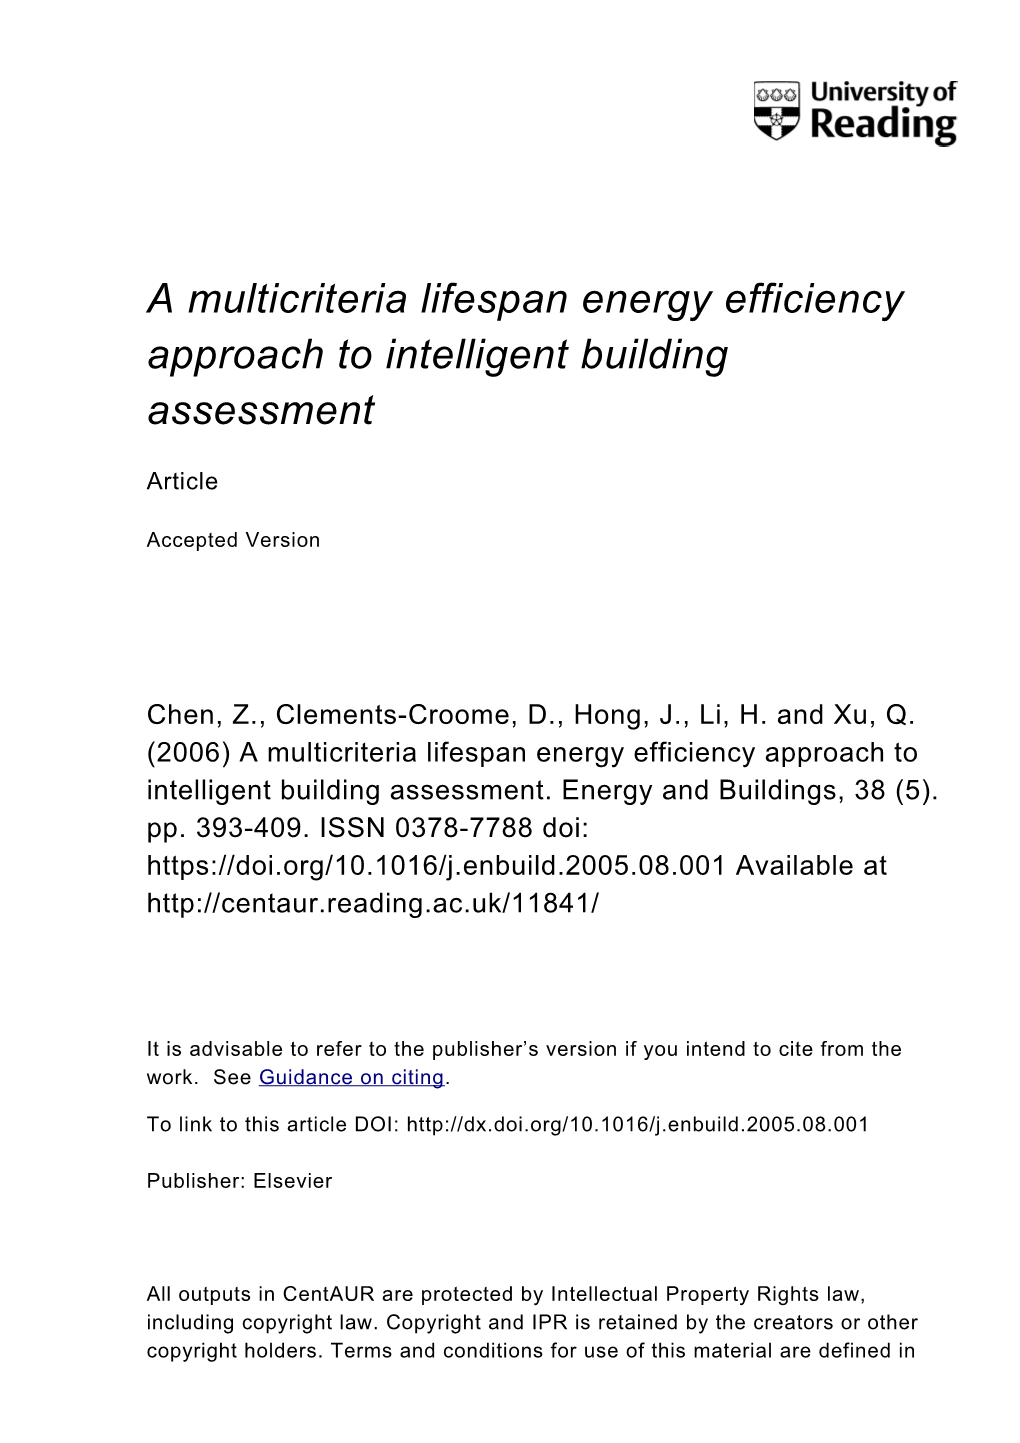 A Multicriteria Lifespan Energy Efficiency Approach to Intelligent Building Assessment